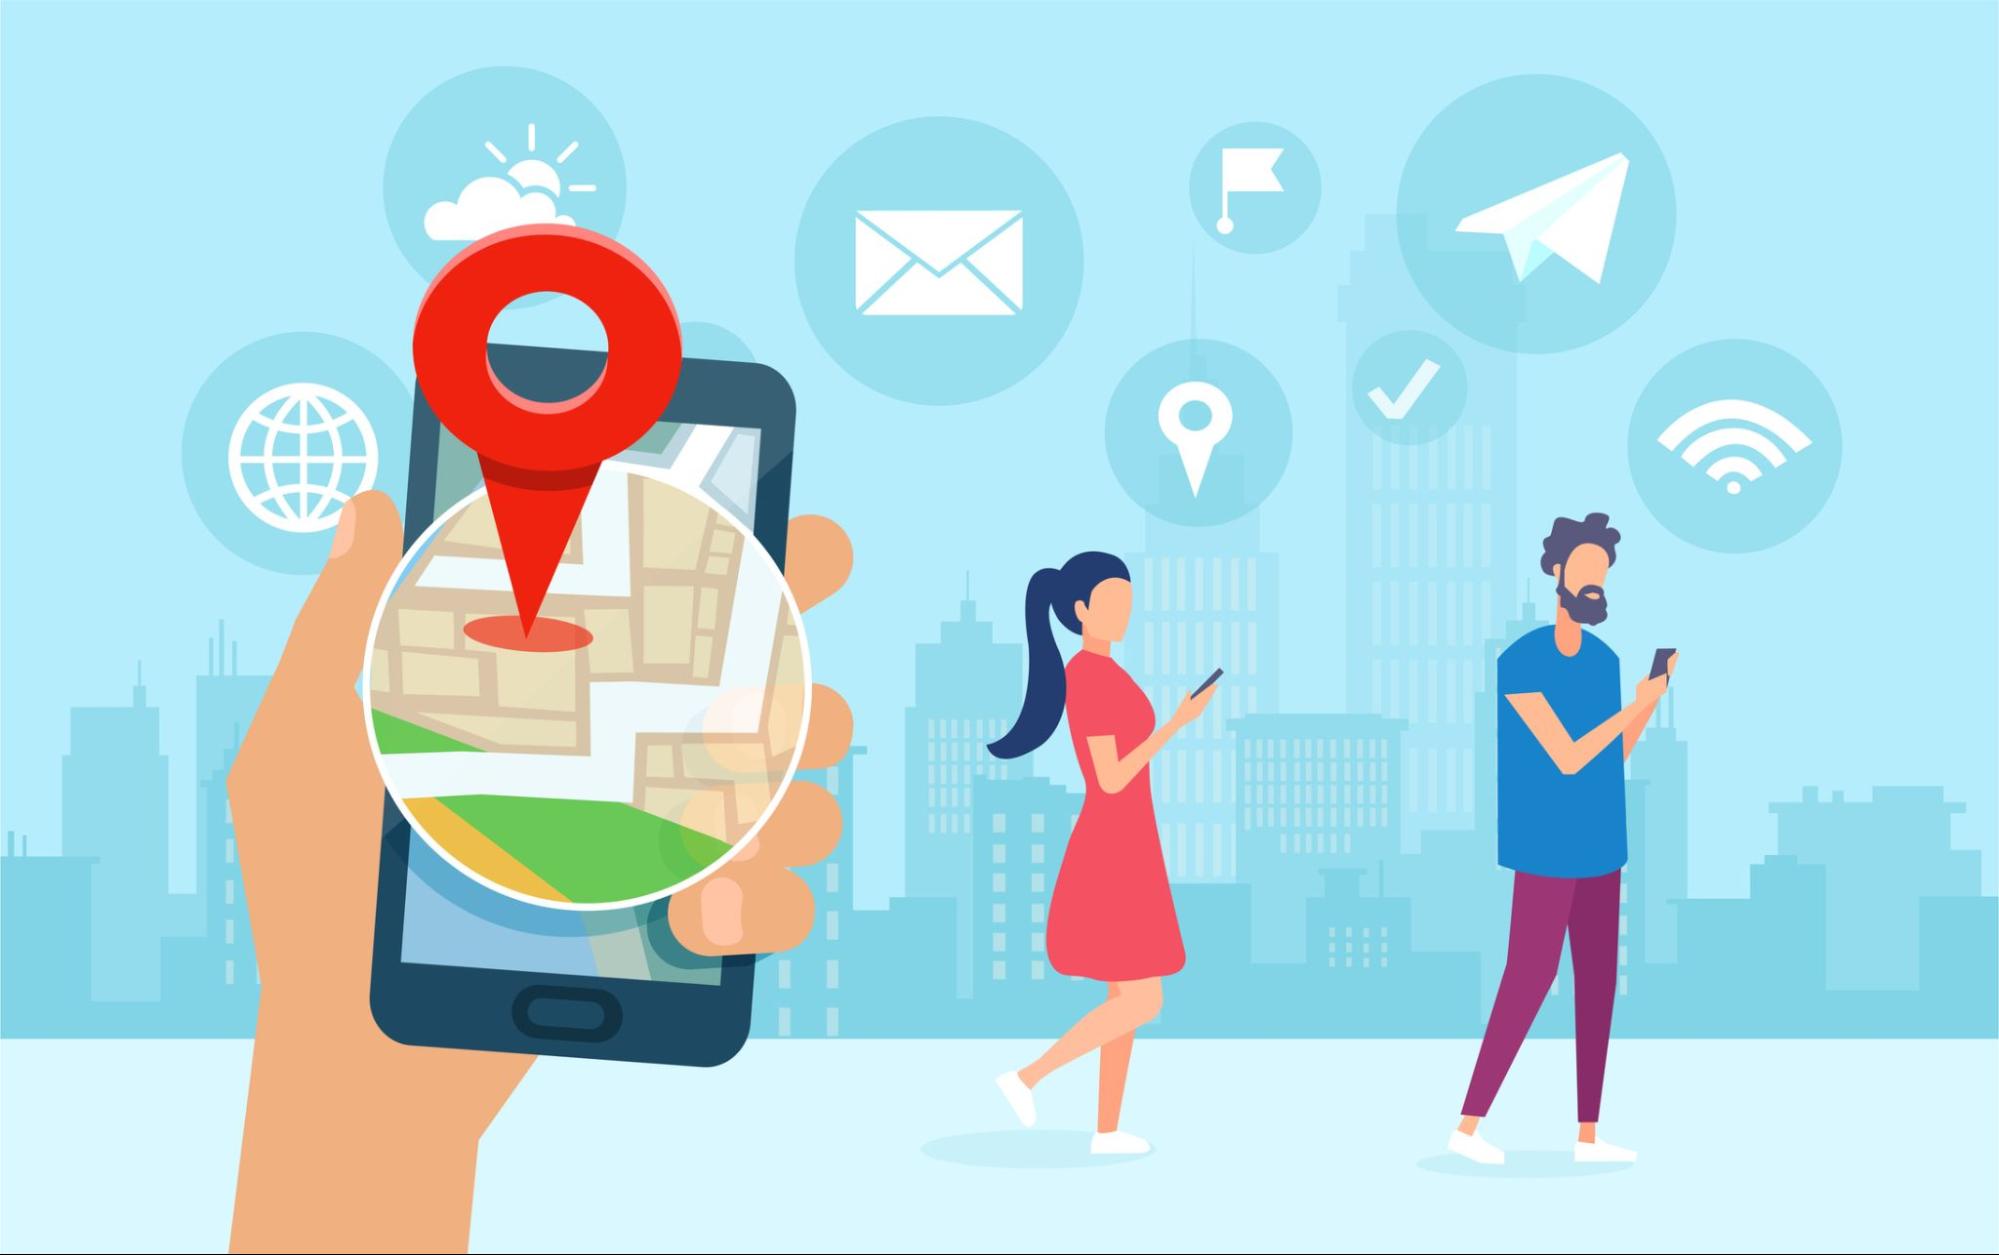 Vector illustration of young people using smartphone apps to share location, chat, and browse, ideal for multi-location SEO.